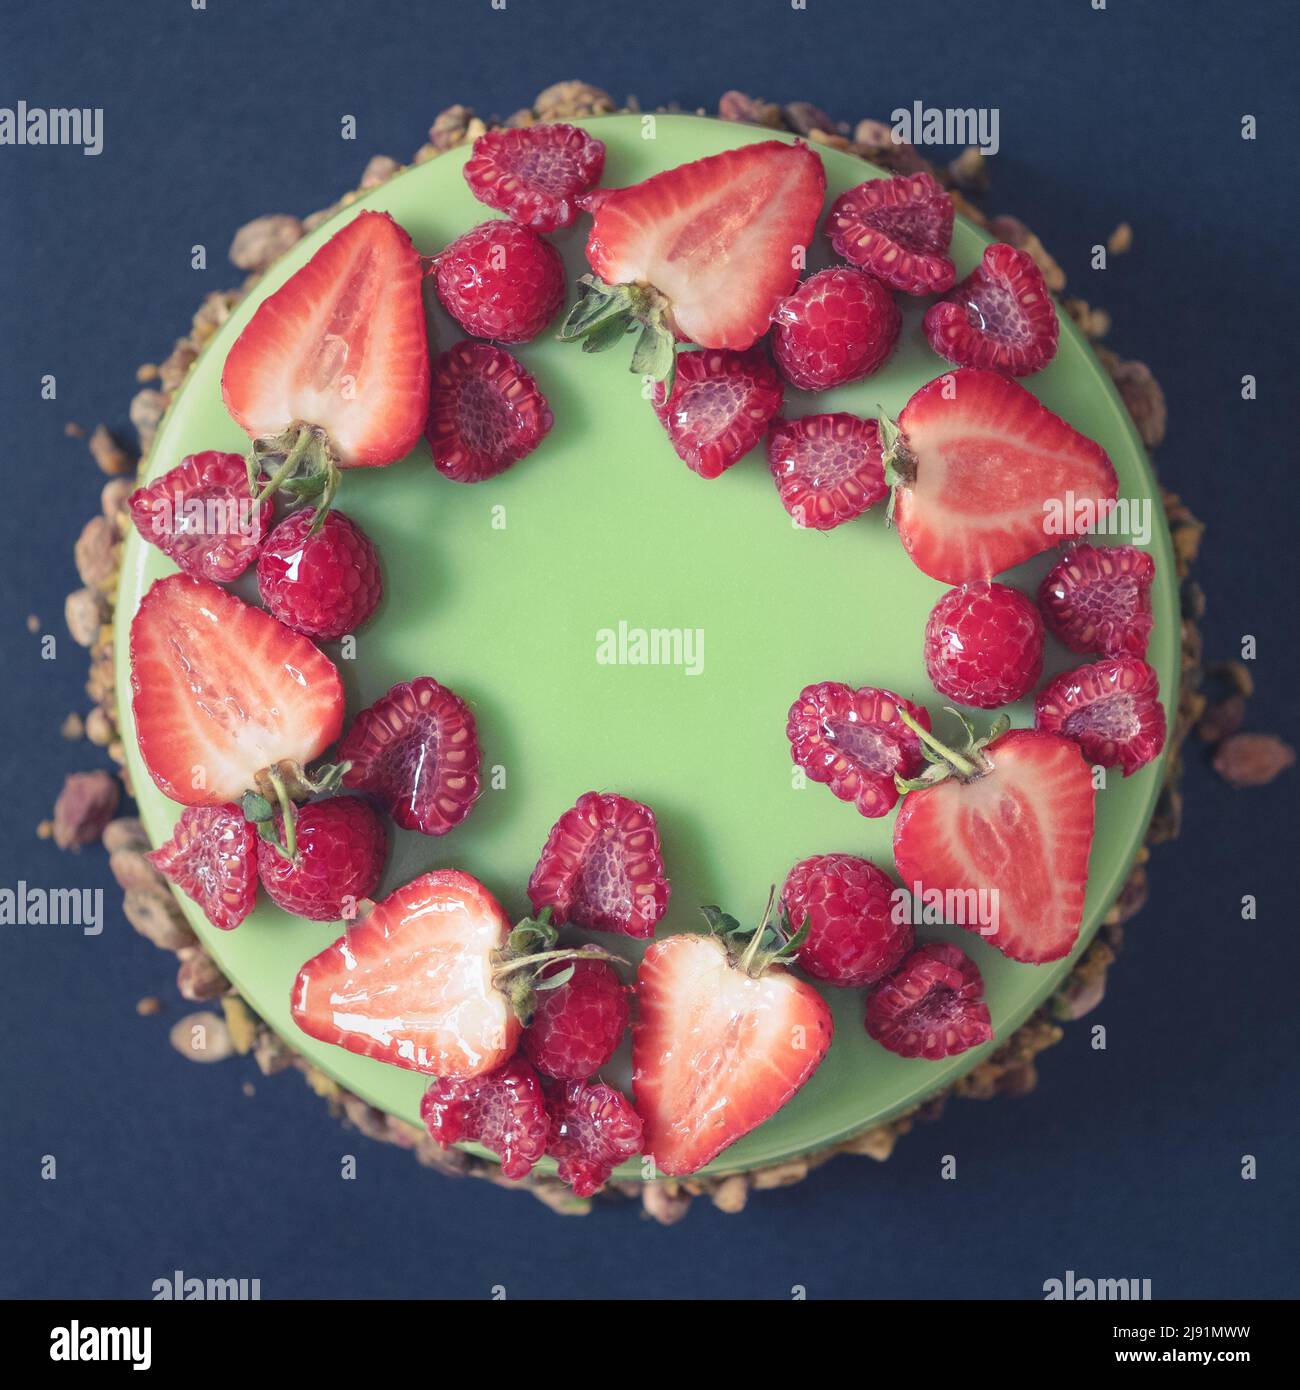 A Beautiful Pistachio Birthday Cake, Topped With Fresh Strawberries And Raspberries Stock Photo